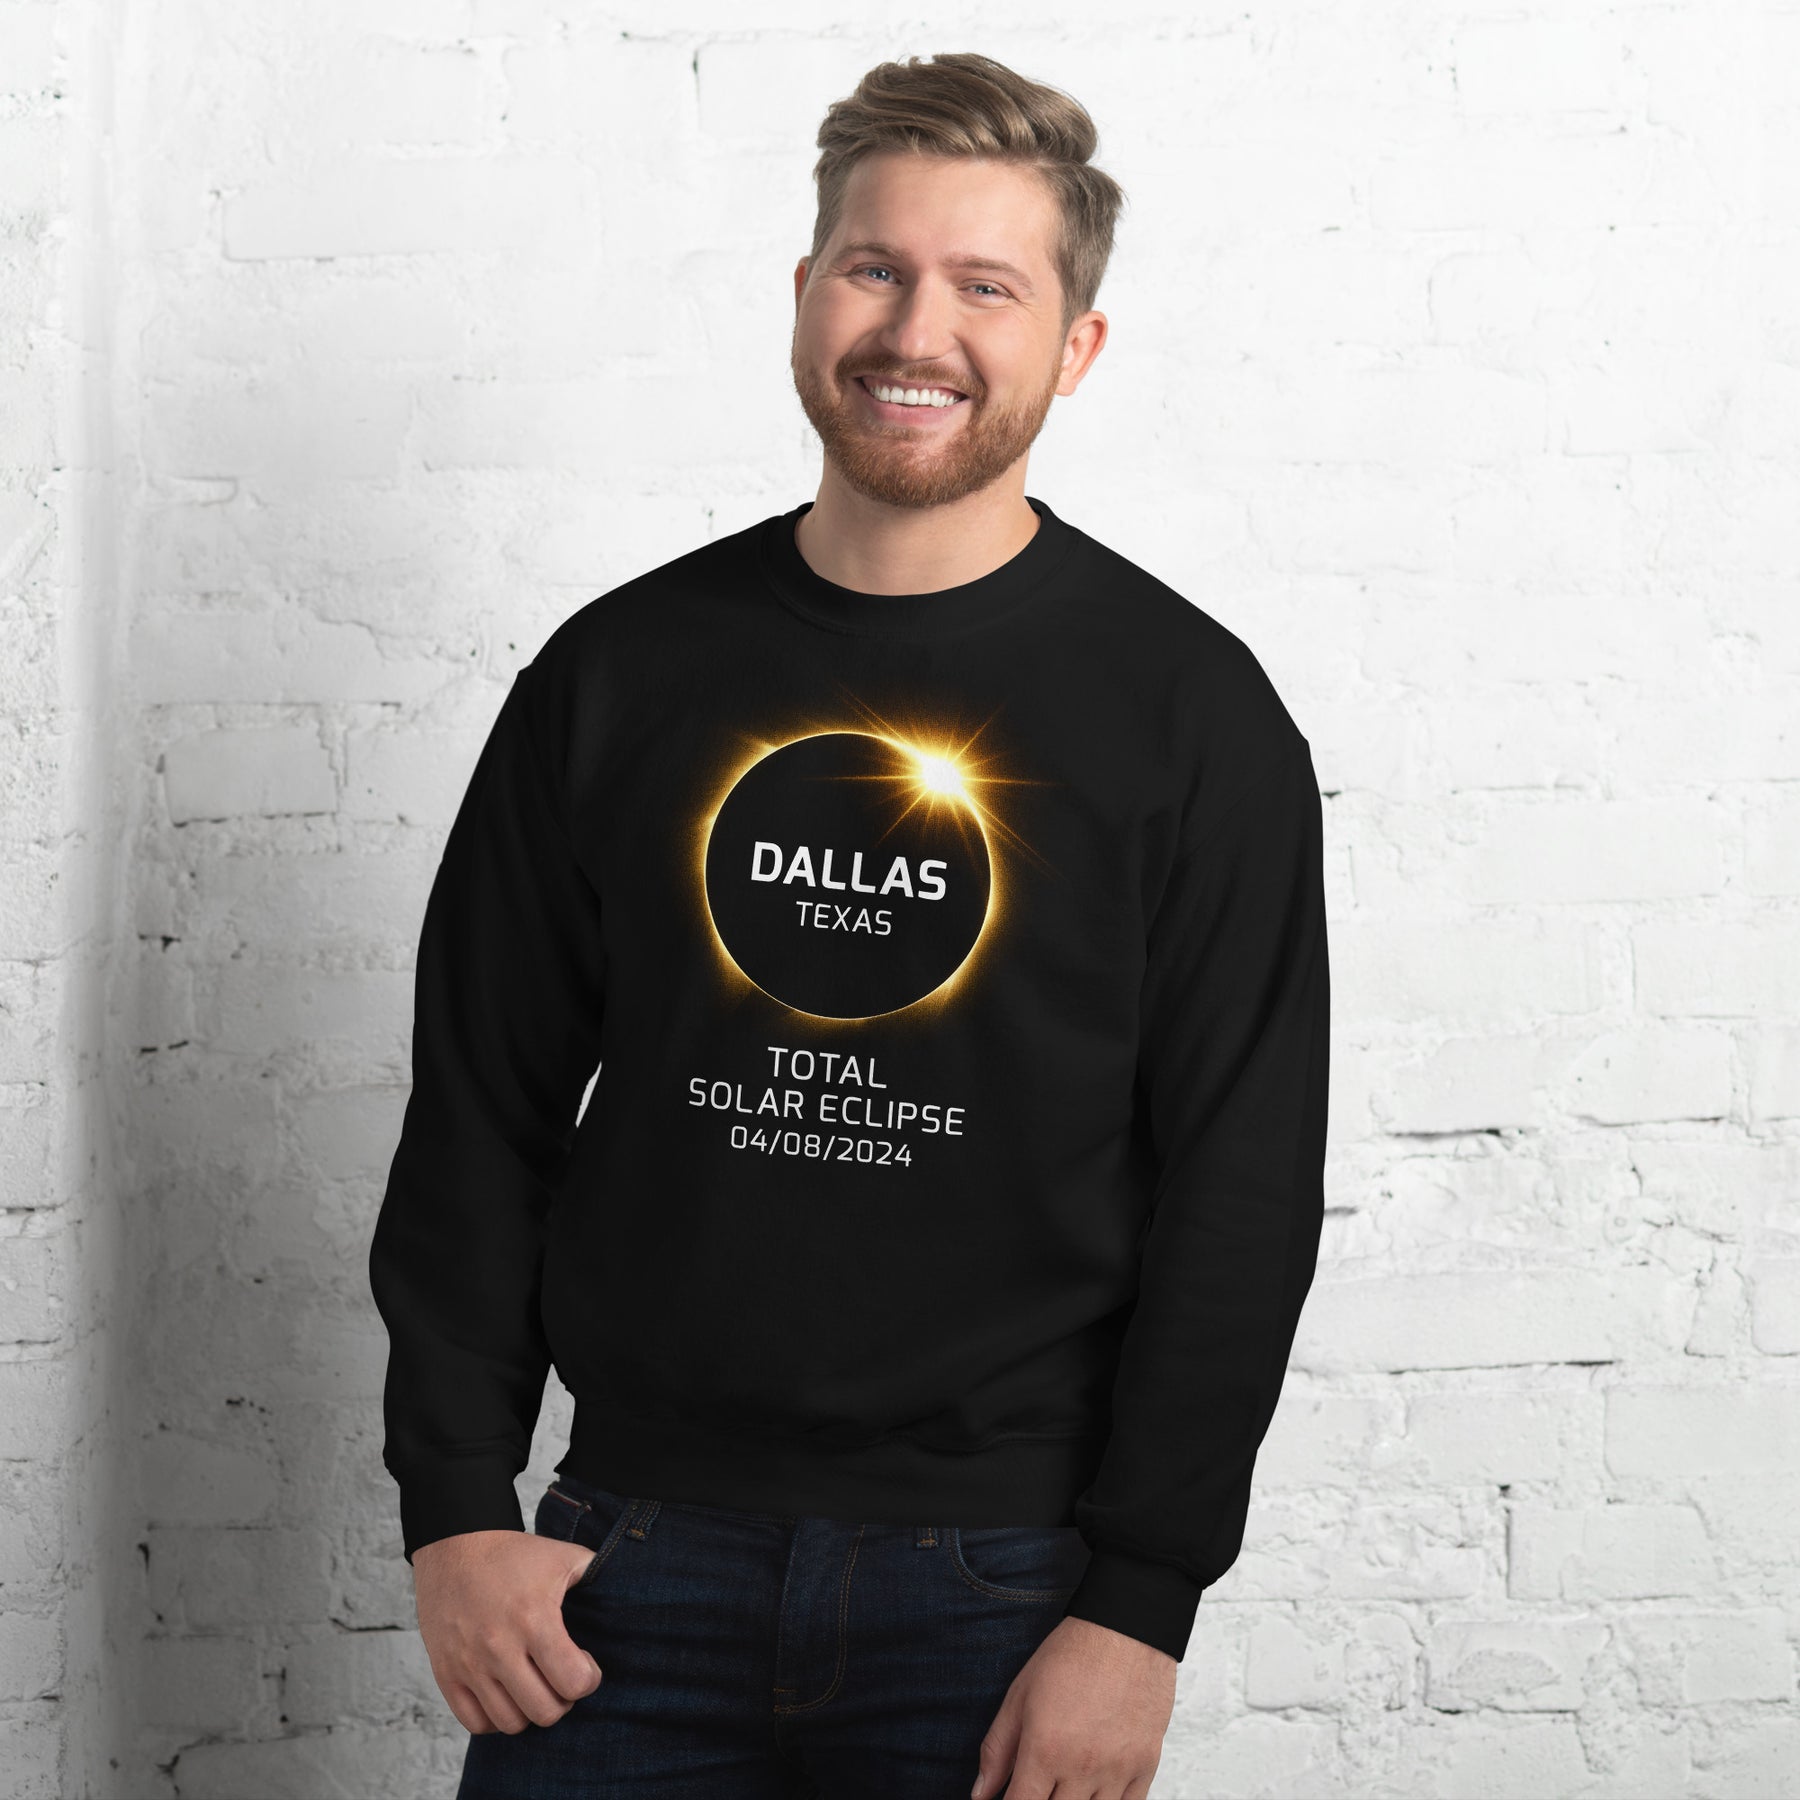 Total Solar Eclipse 2024 Sweatshirt - Custom And State City- Astronomical Event